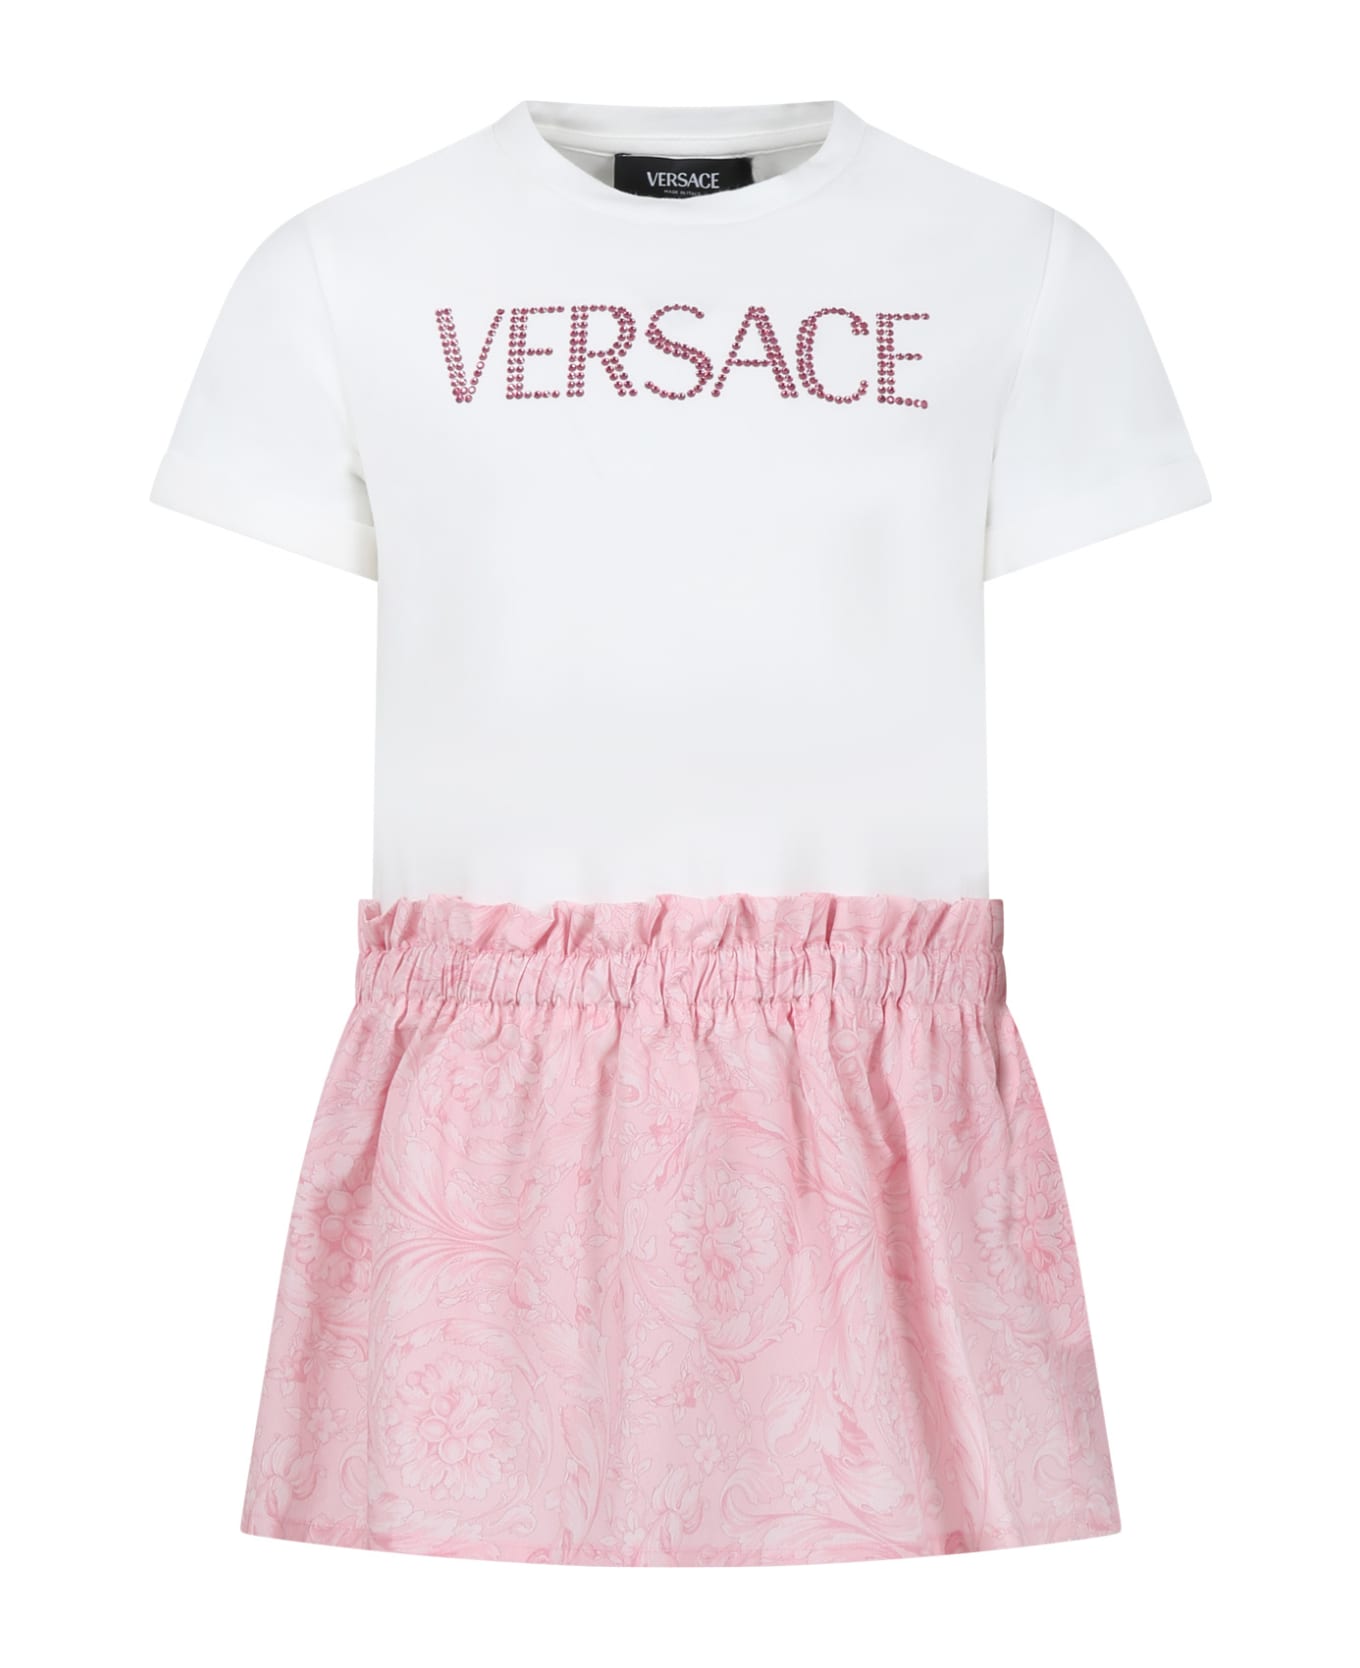 Versace Pink Dress For Girl With Baroque Print And Rhinestone Logo - Pink ワンピース＆ドレス